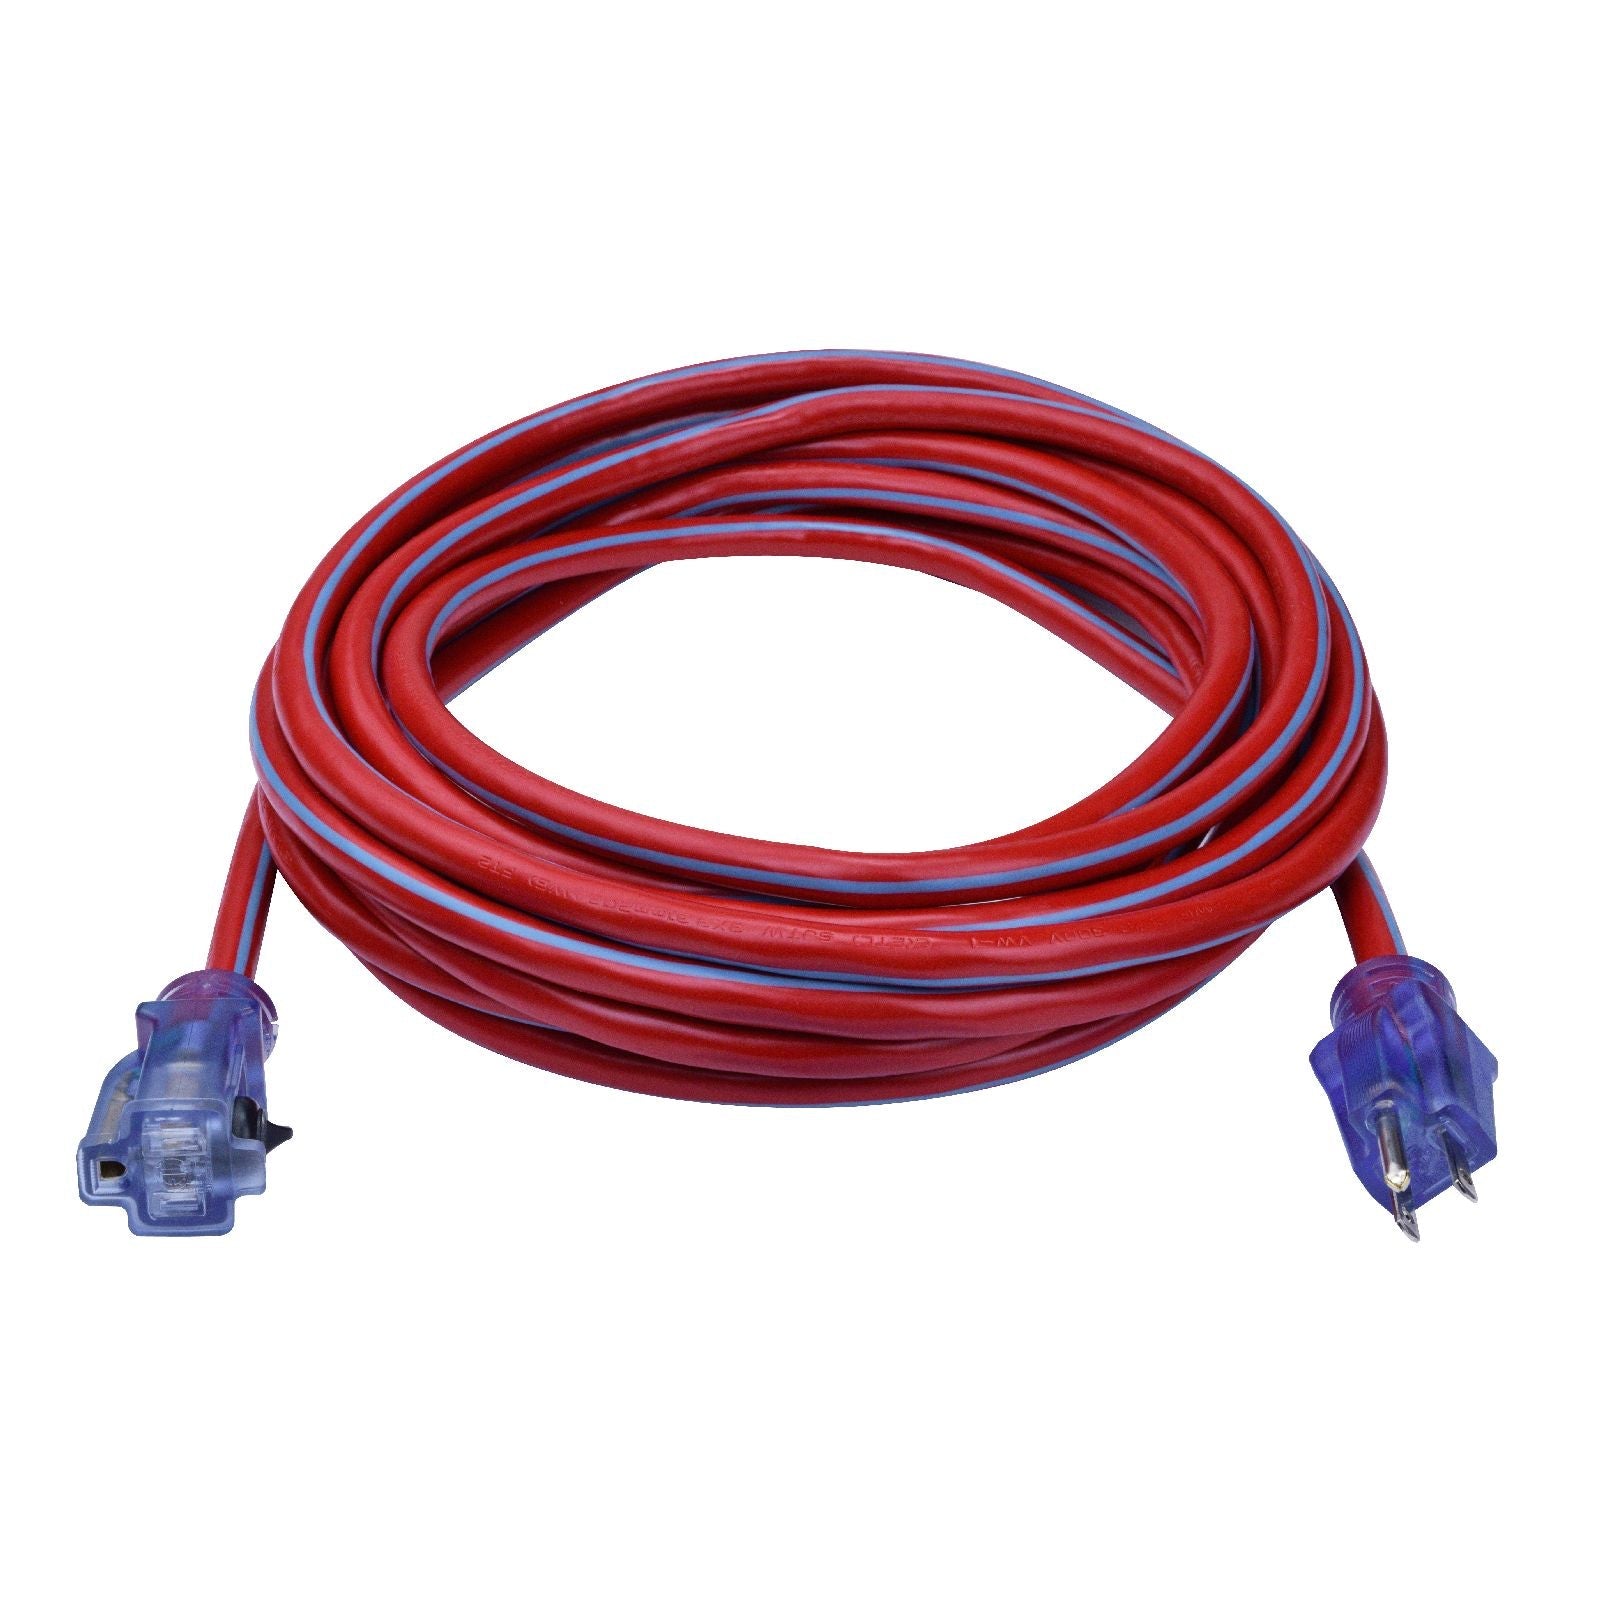 Prime Jobsite® Outdoor Extension Cord w/ Locking & Lighted Connector - Single Tap